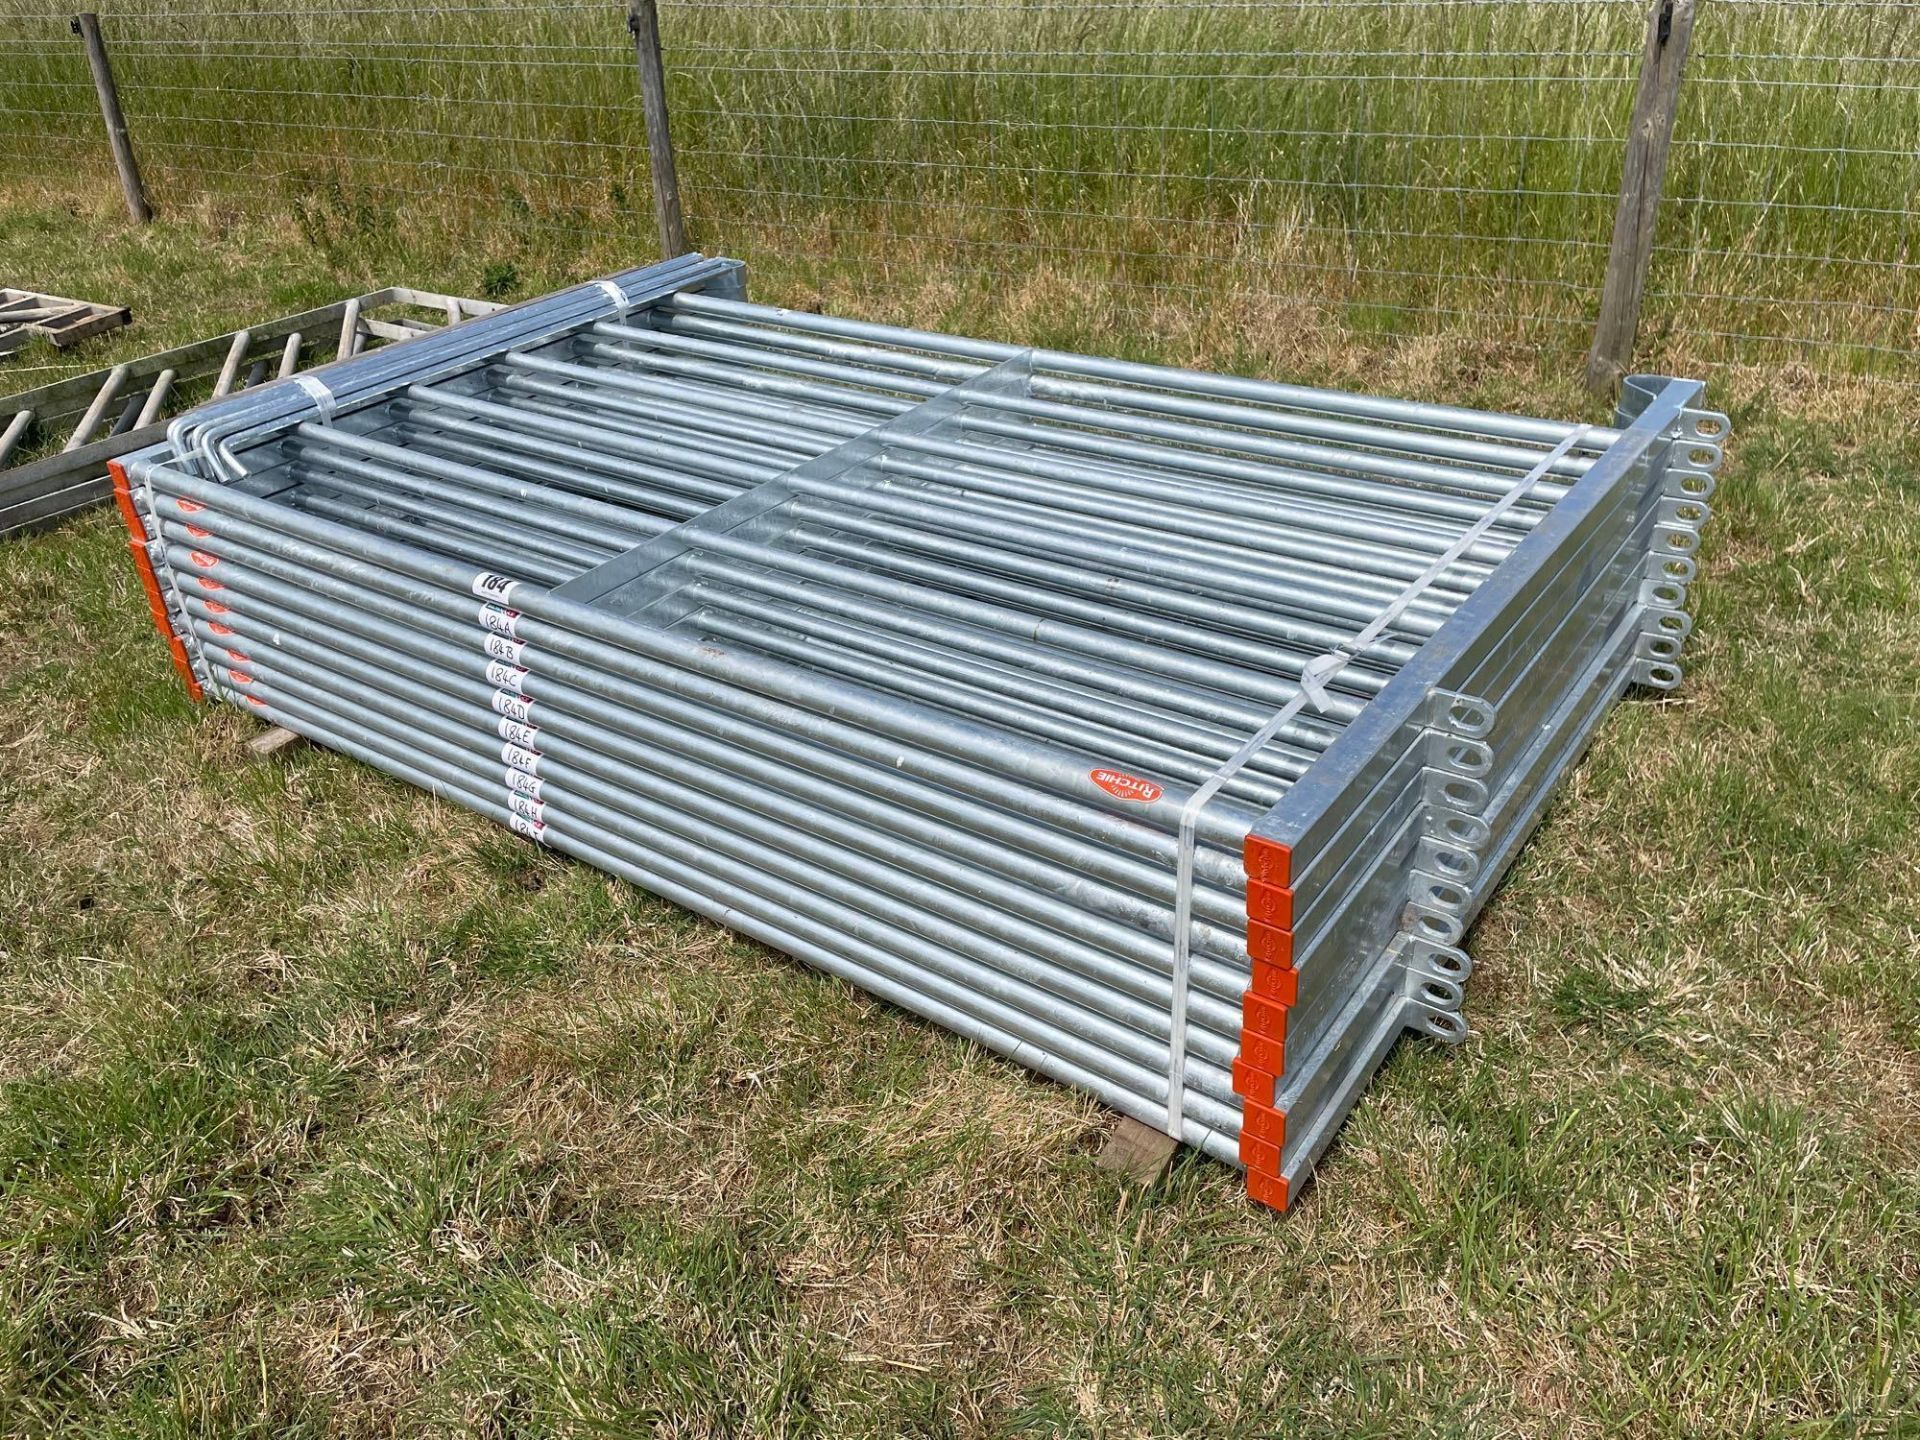 Single Ritchie 8ft hurdle with single pin. To be sold with the option on up to 10 hurdles